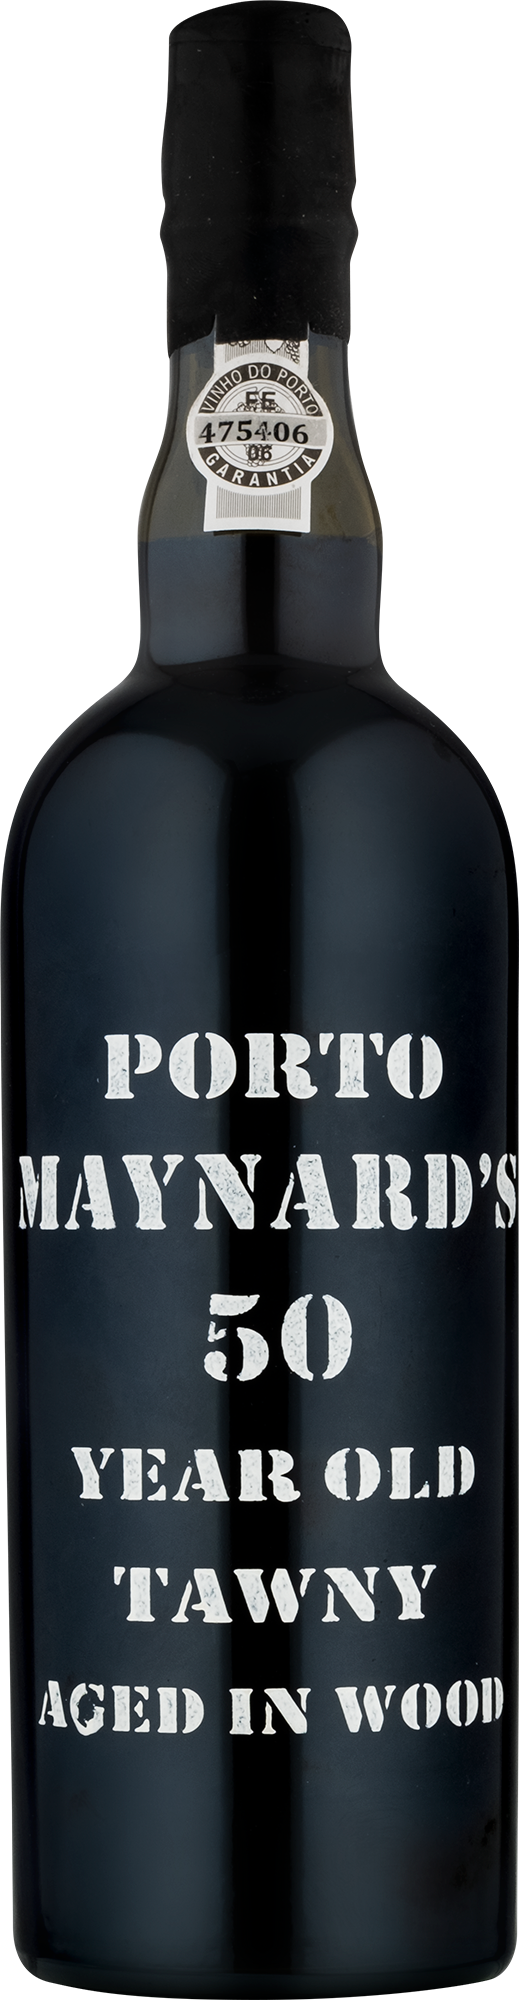 Maynards Porto 50 Years Old Tawny  - matured in wood 37,5 cl